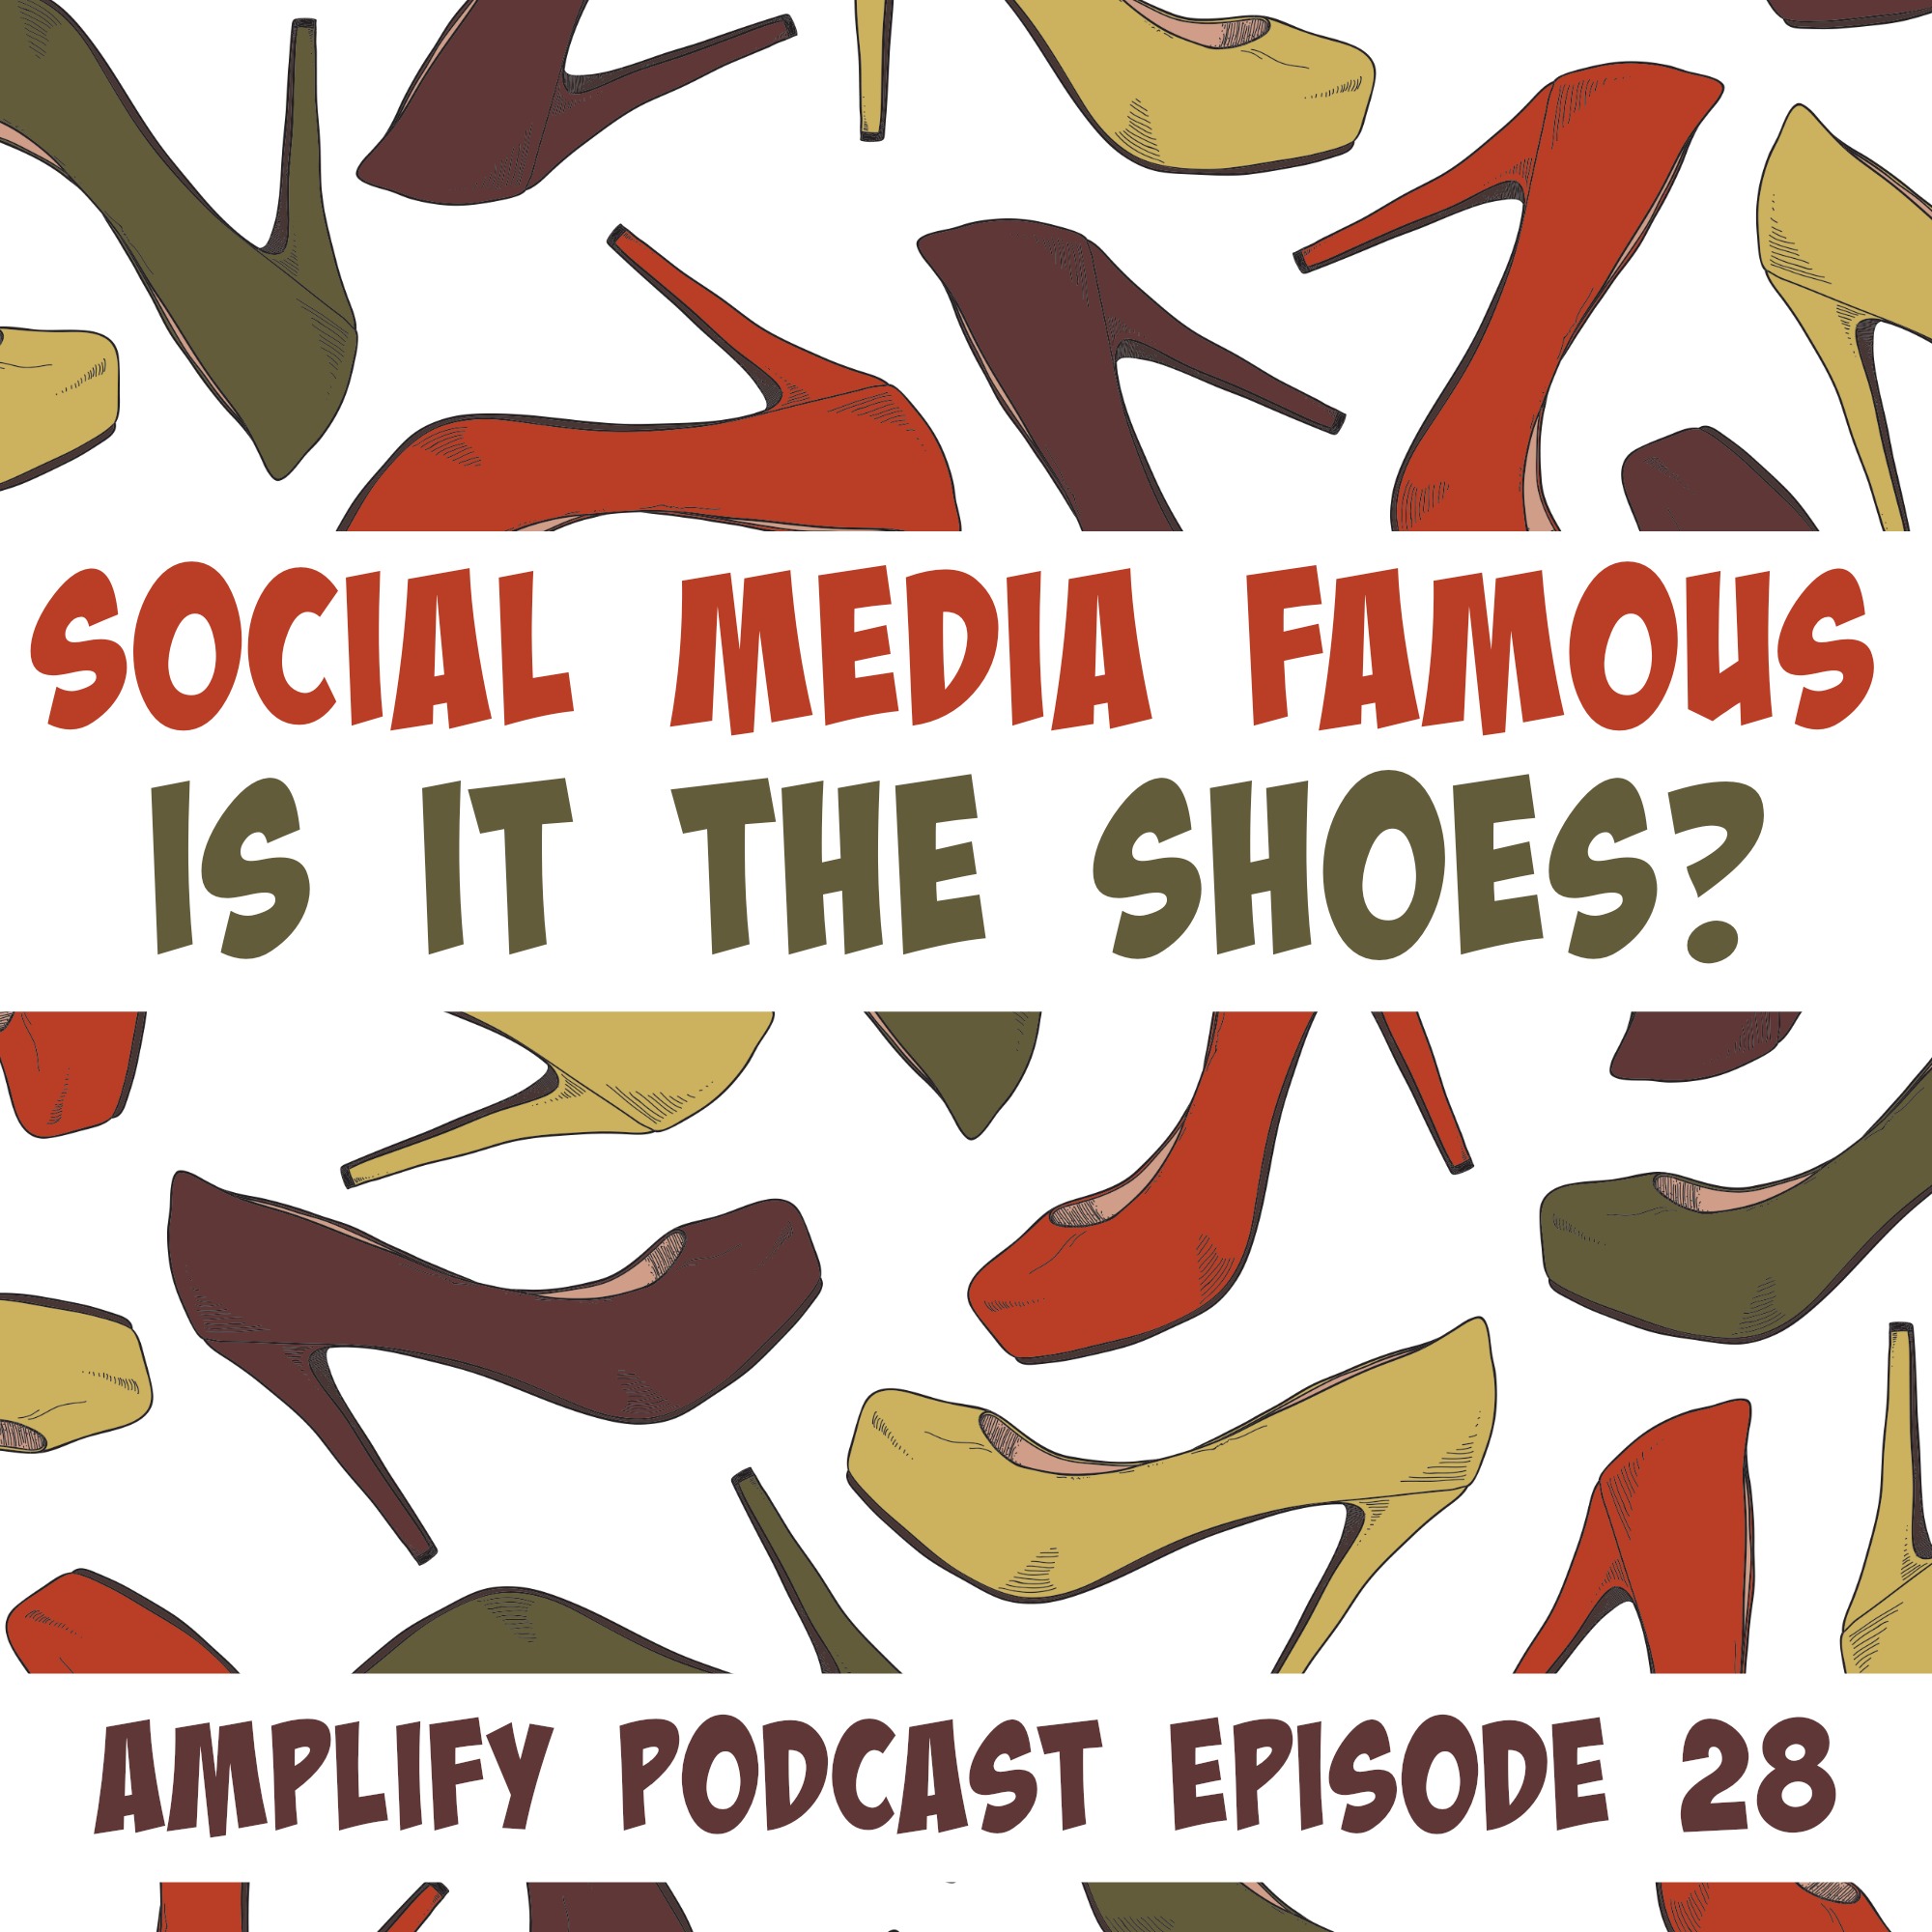 You are currently viewing Social Media Famous: Is it the shoes?